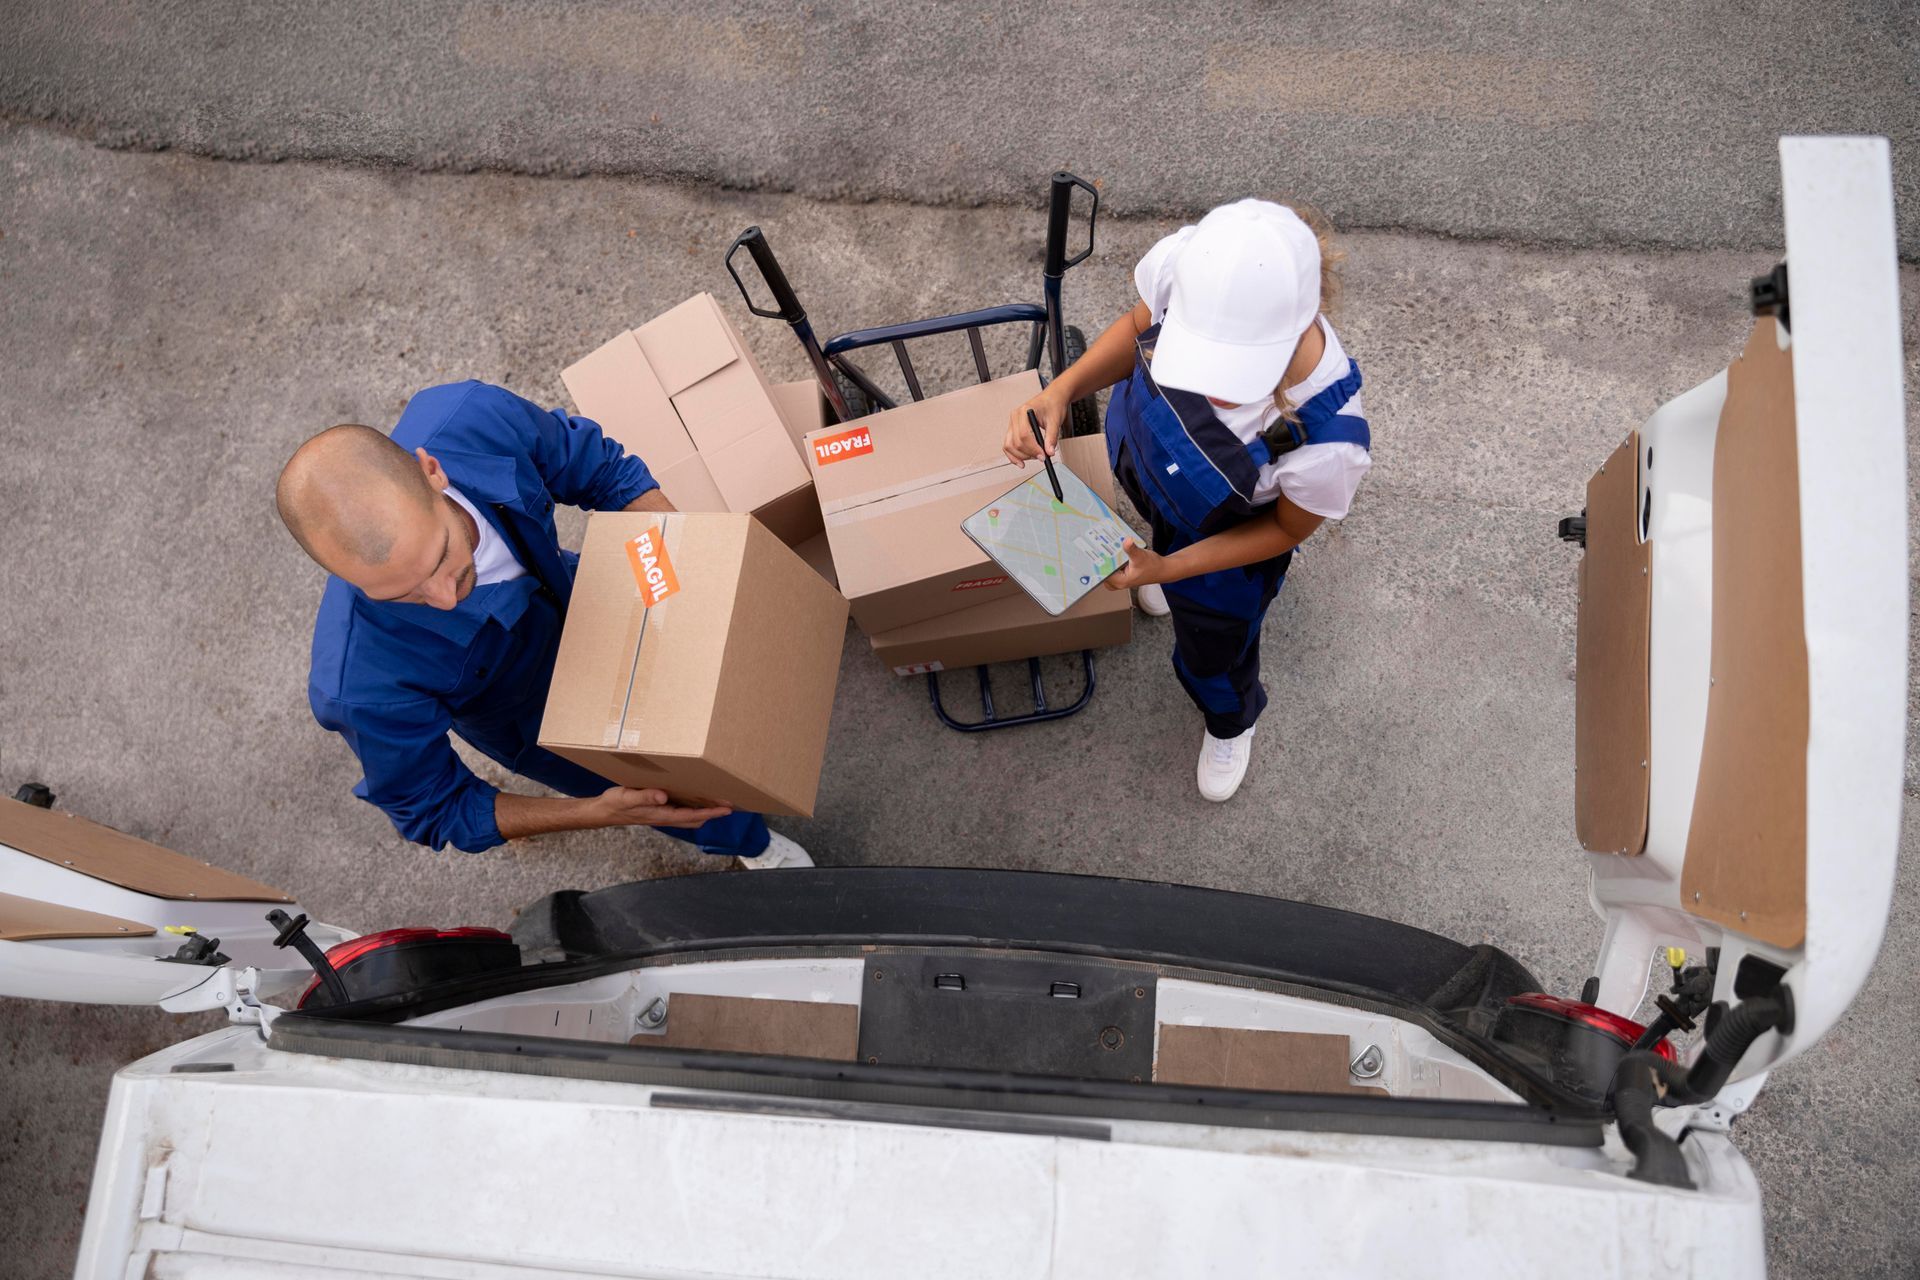 A man and a woman are loading boxes into a van.